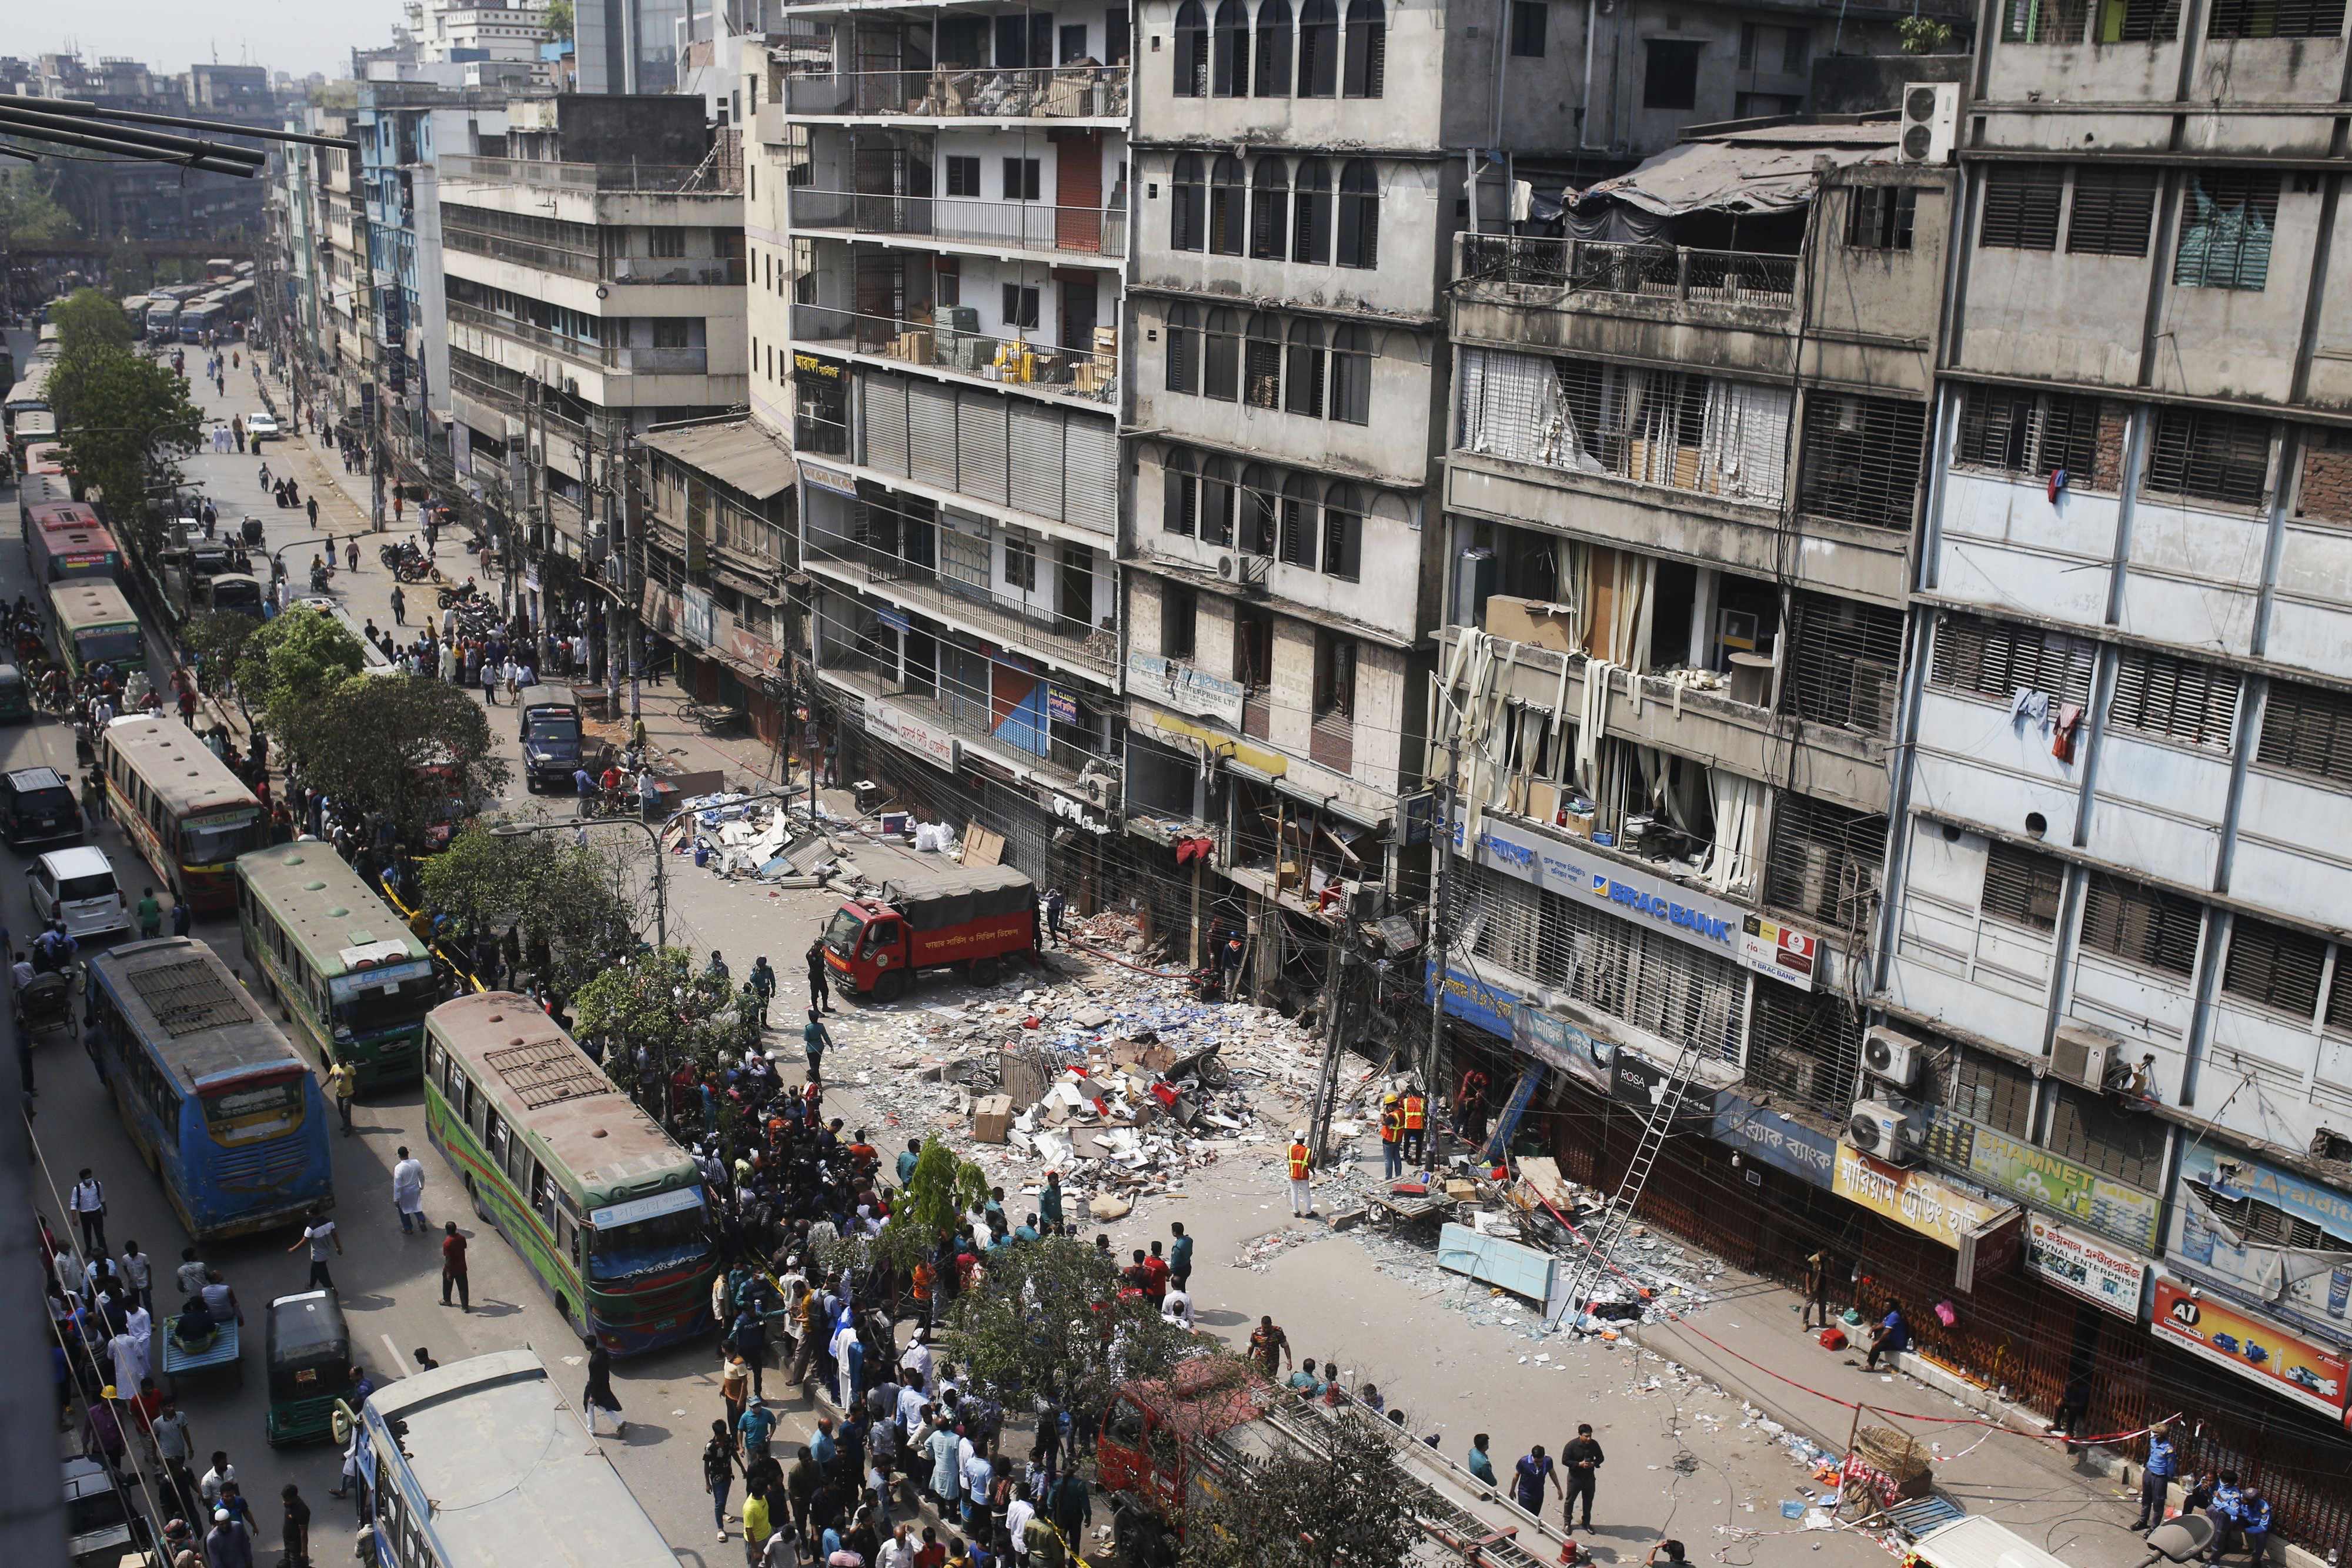 Firefighters and emergency teams work amid debris a day after an explosion inside a building in Dhaka on 8 March